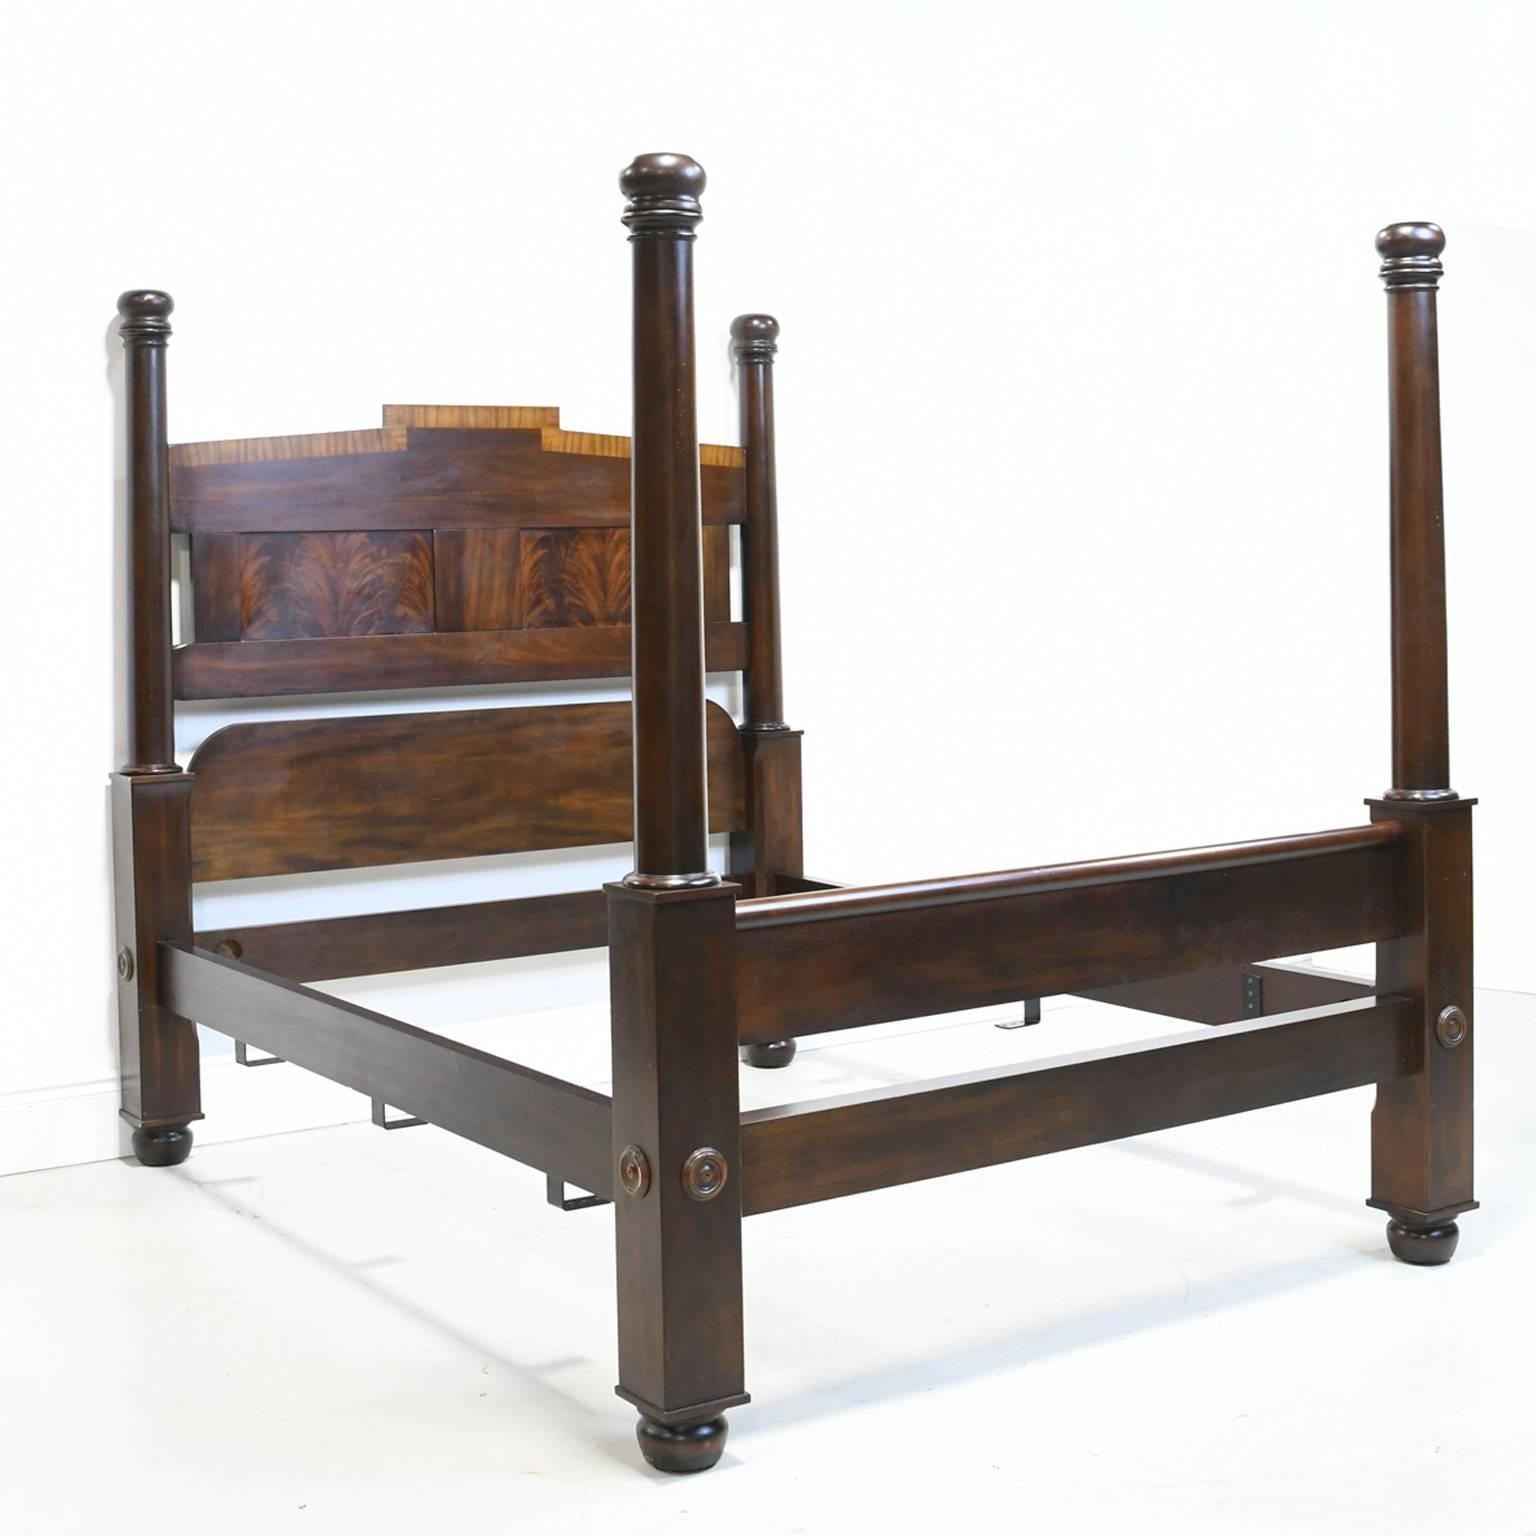 An American Empire or Federal style queen-size bed with four posts in the manner of North Carolina cabinetmaker Thomas Day. This bed was produced by Craftique in the mid to late 1990s and was part of their Heritage Collection.

Measures: 69